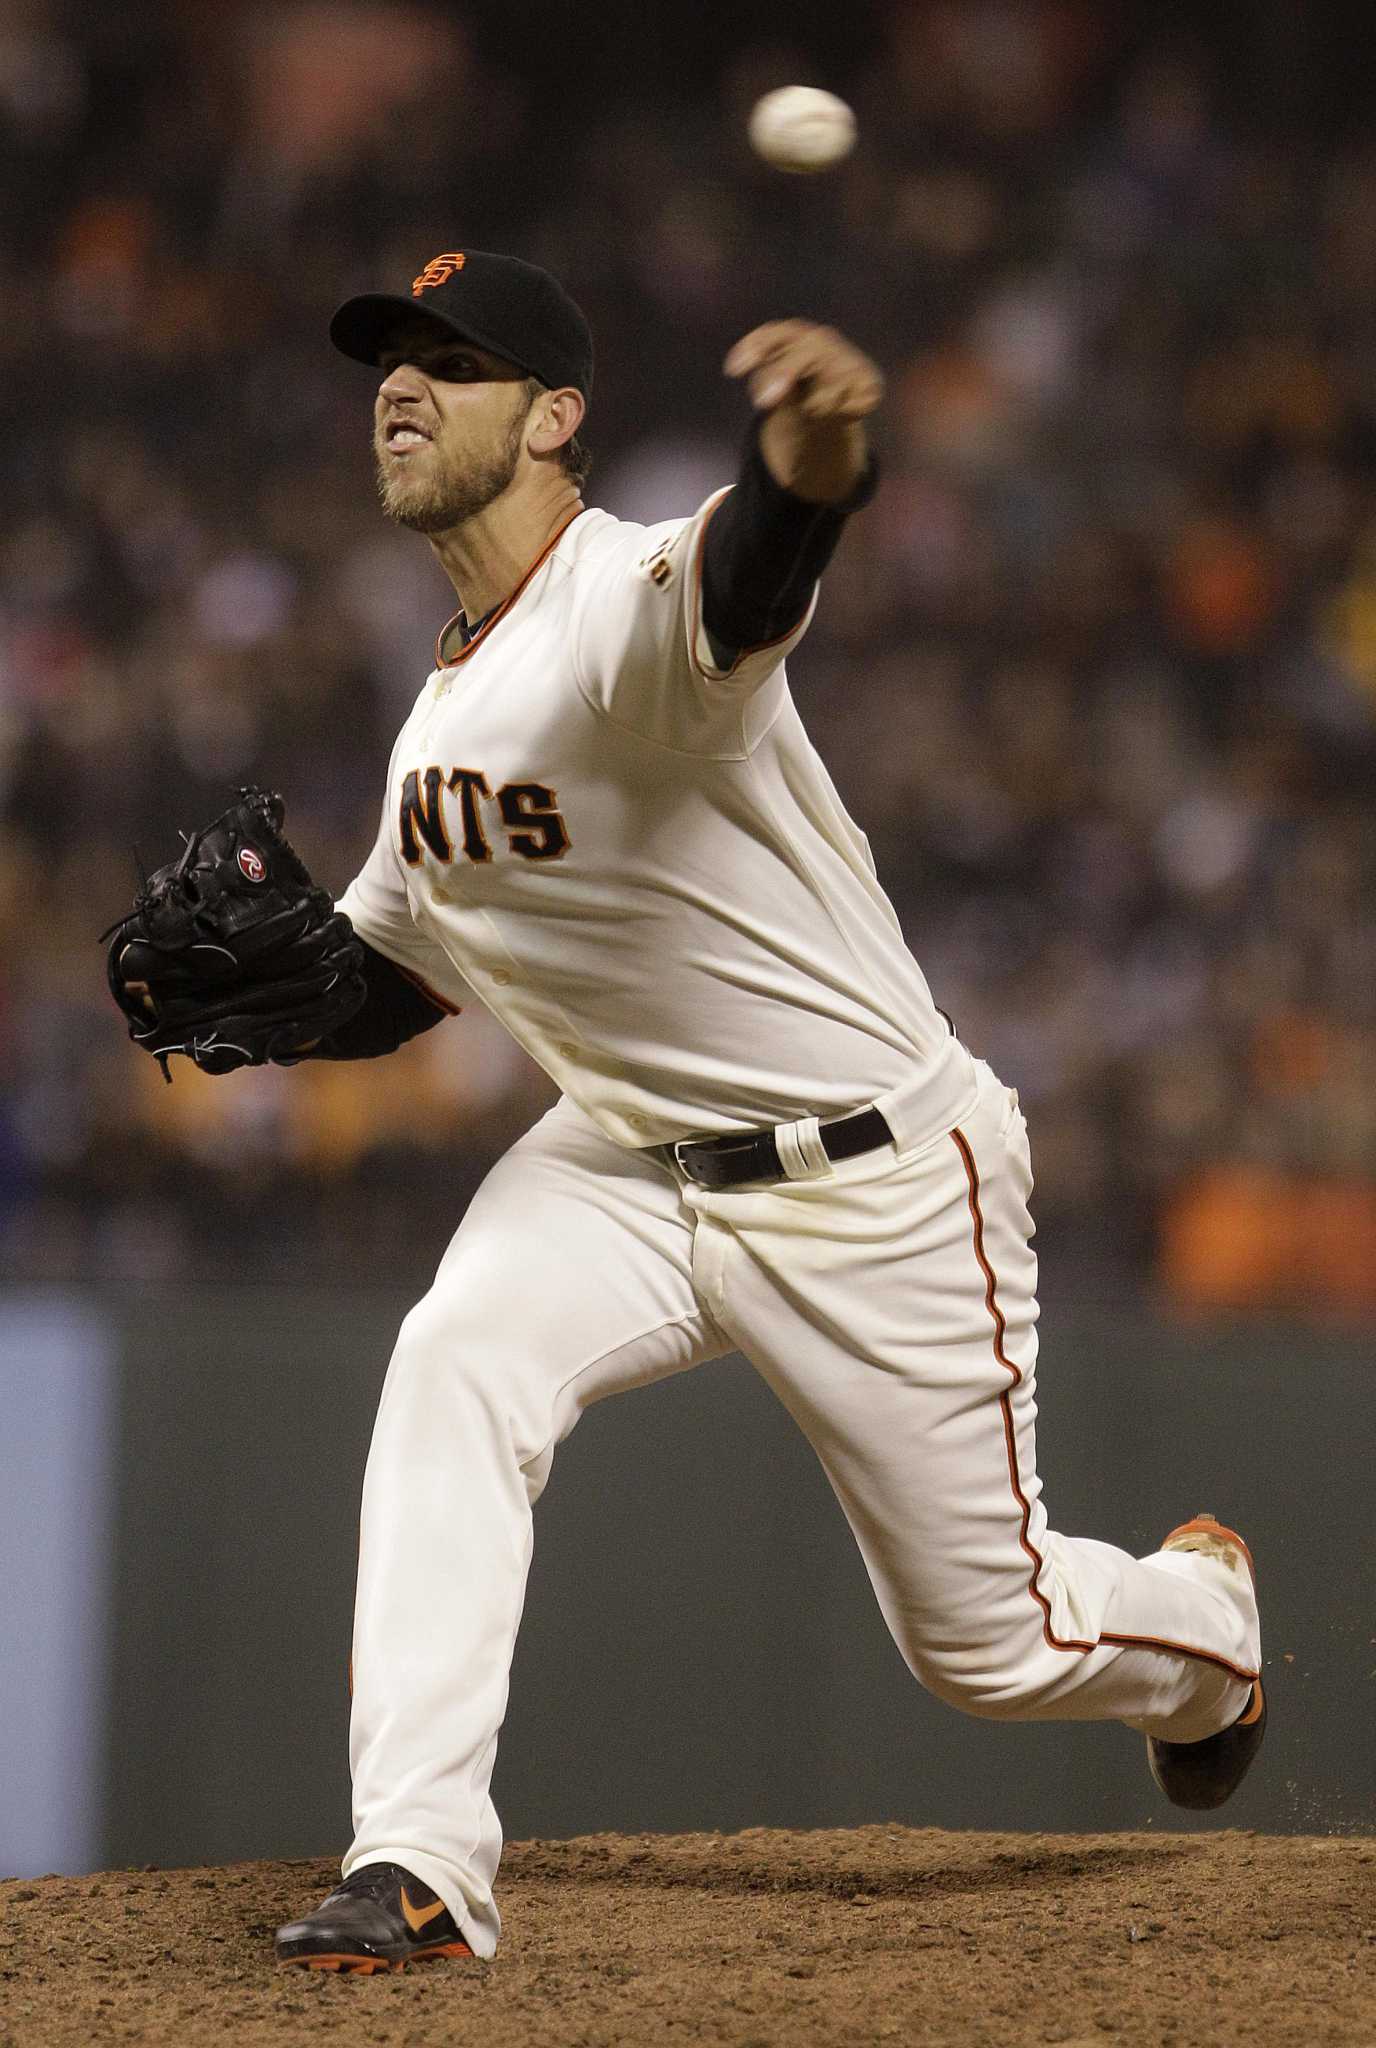 Giants win behind dominant, shaky, weird-as-heck Madison Bumgarner start -  McCovey Chronicles